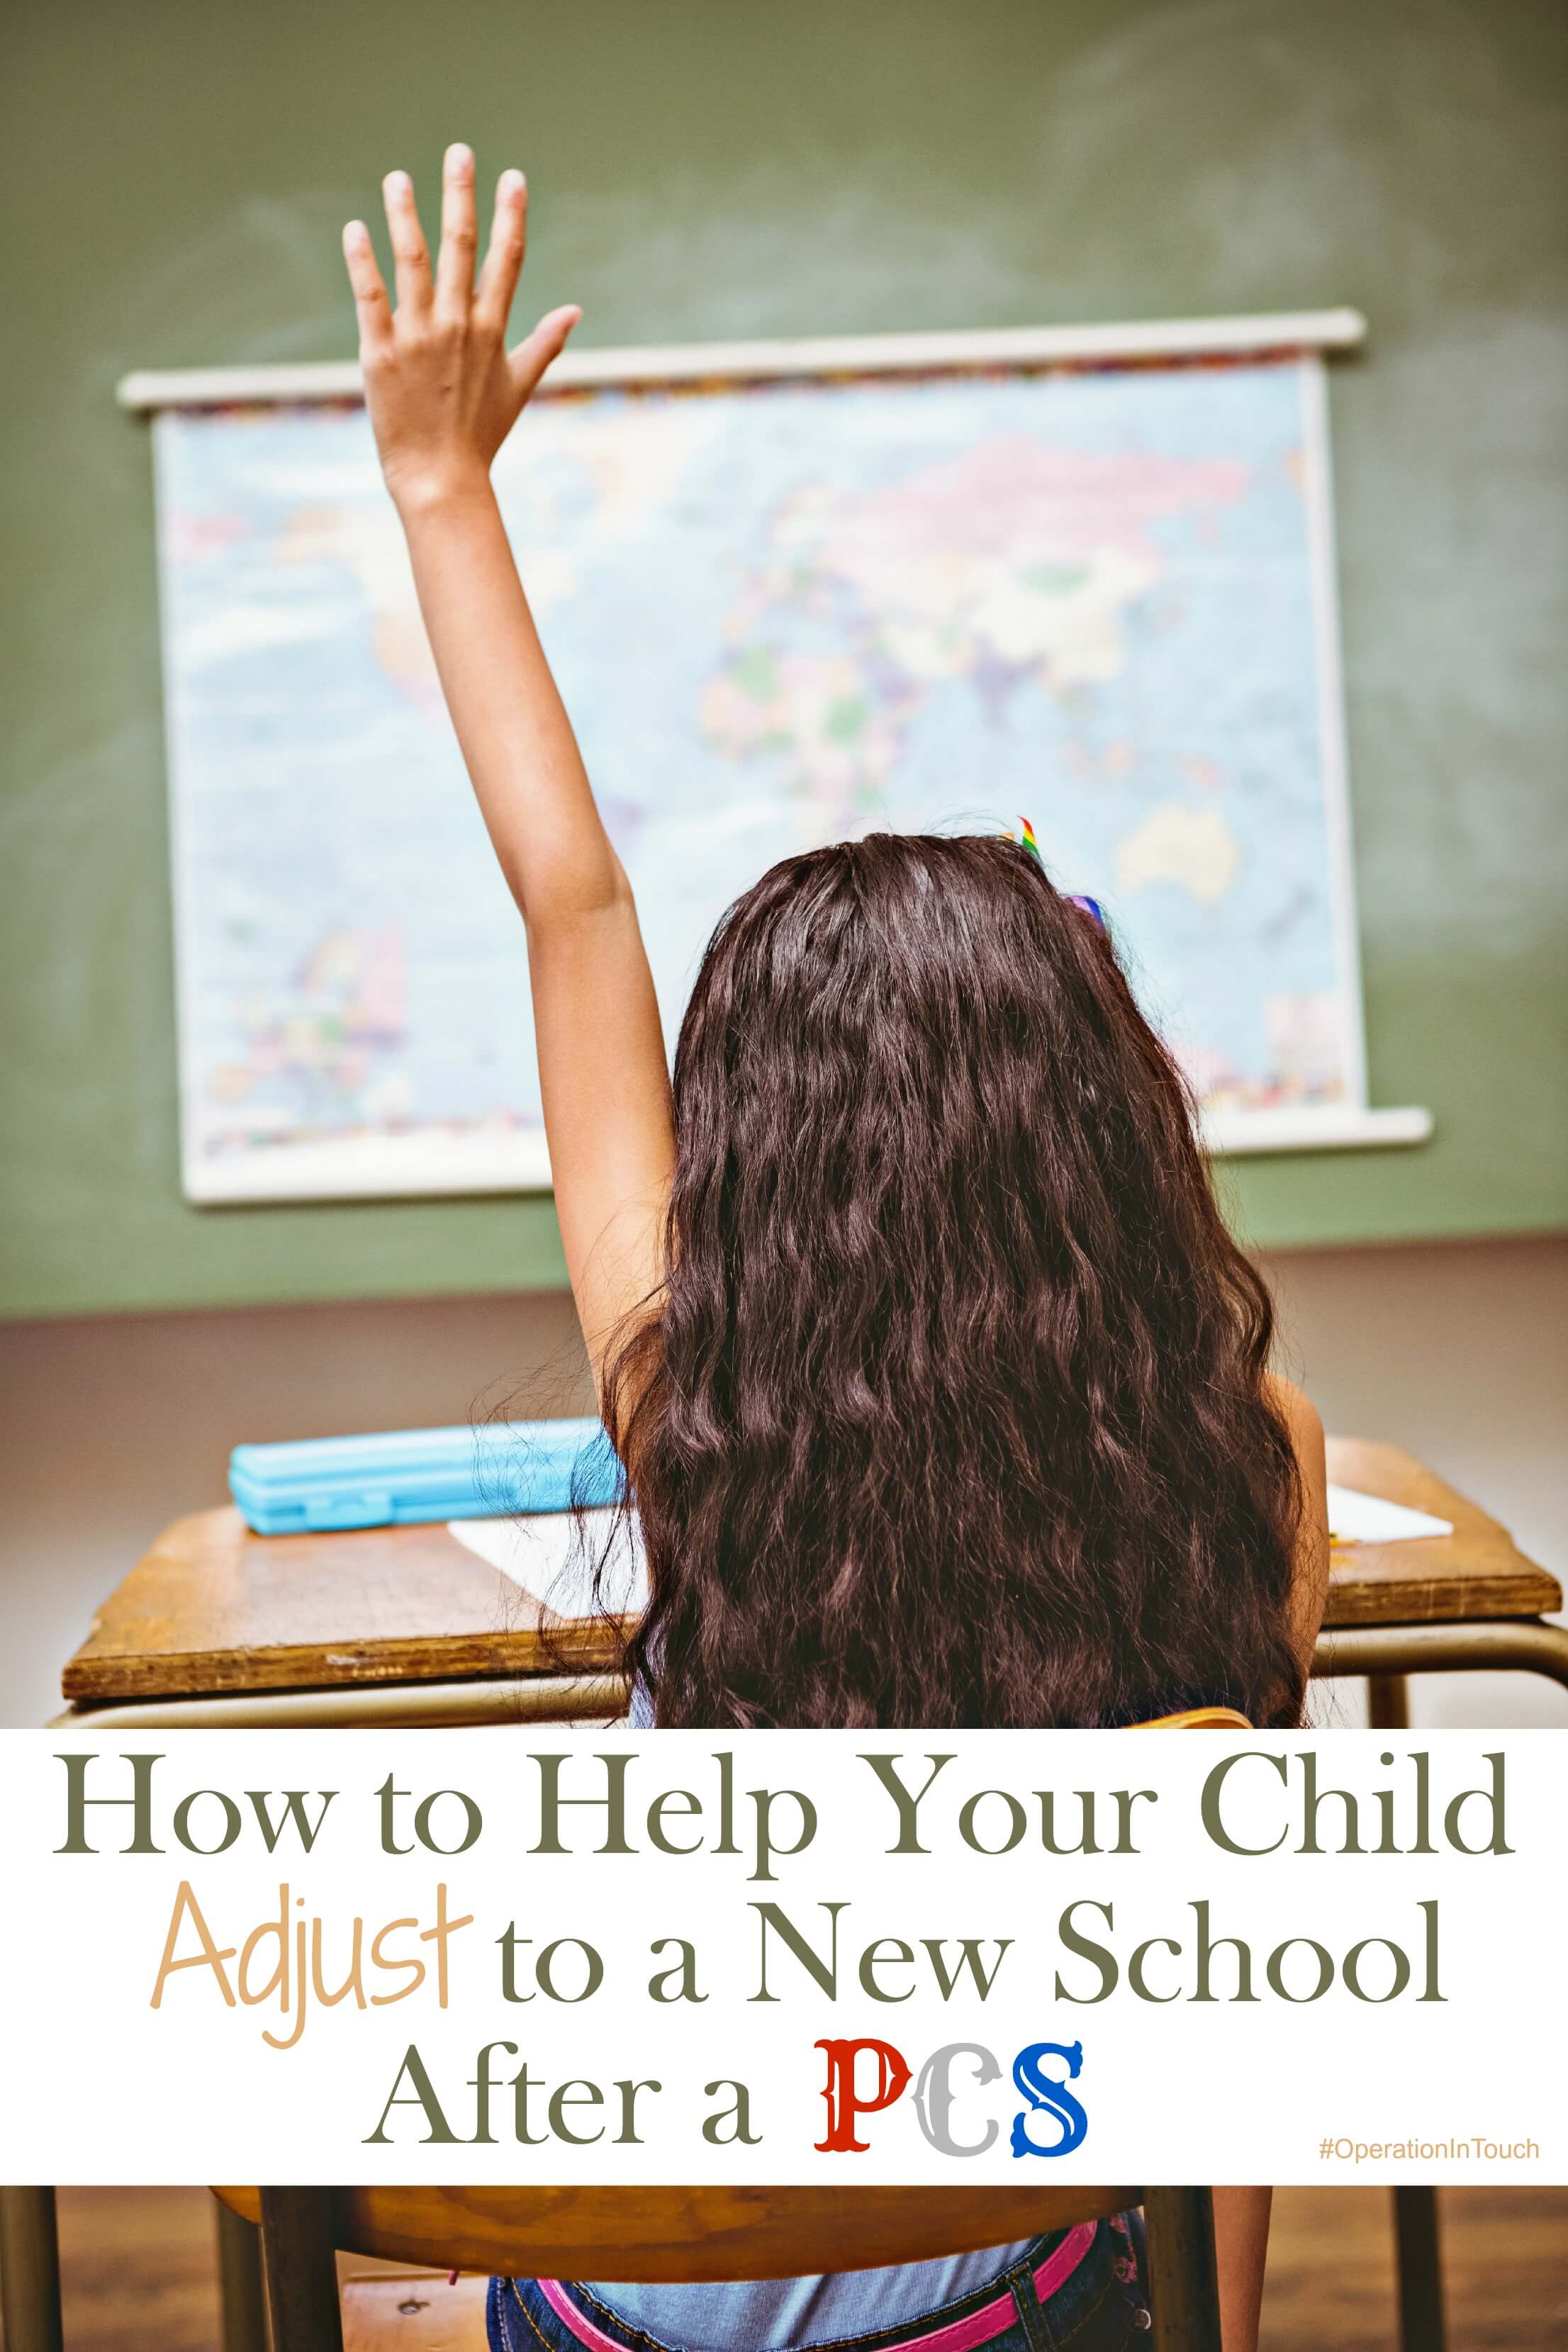 How to Help Your Child Adjust to a New School After a PCS